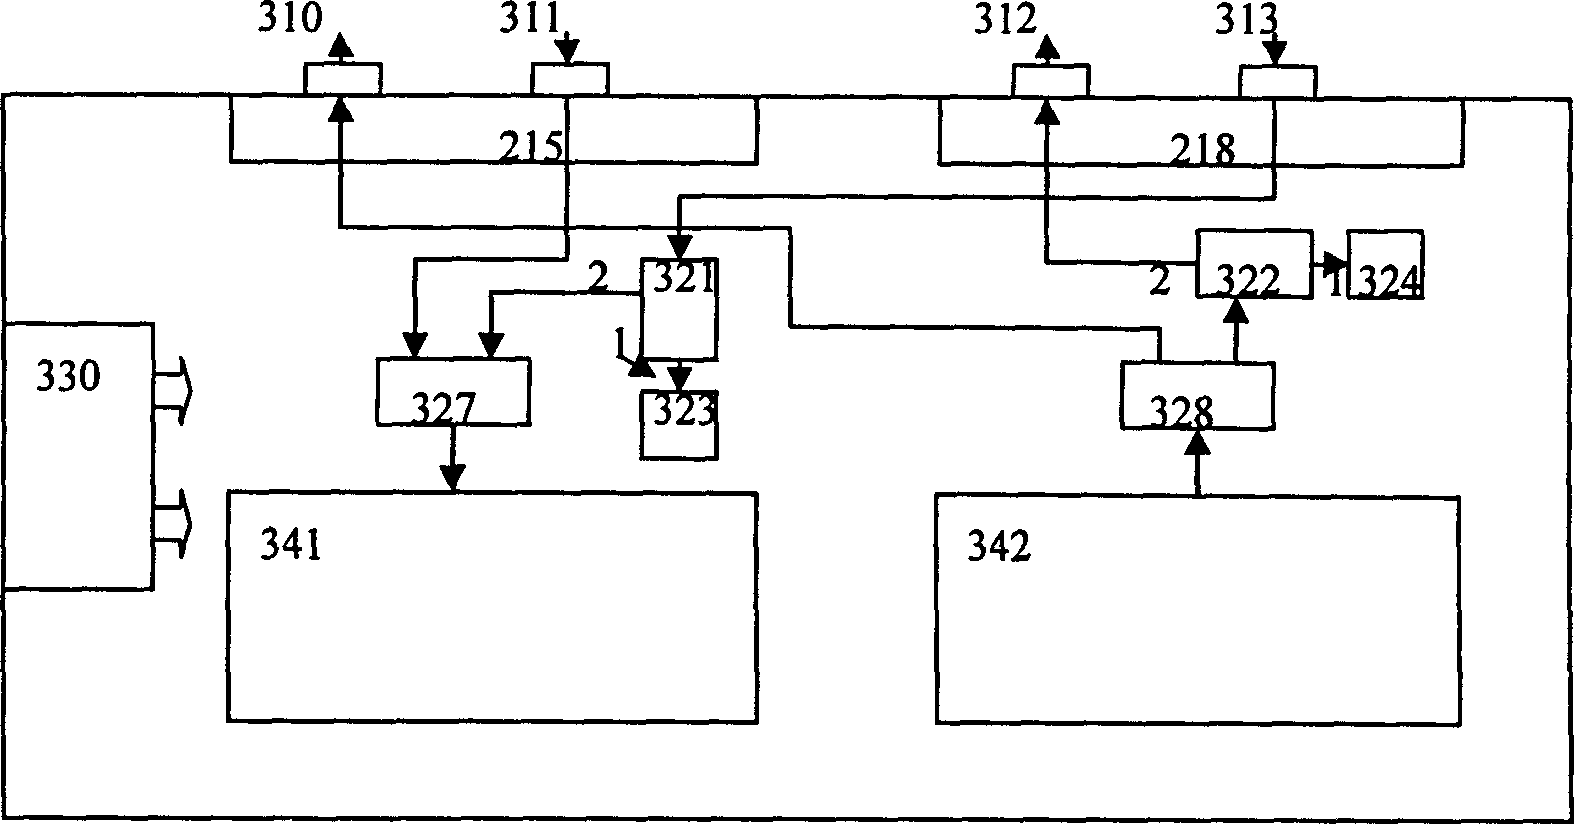 Wireless communication base station/trans receiver loop connection method and medium frequency interface structure